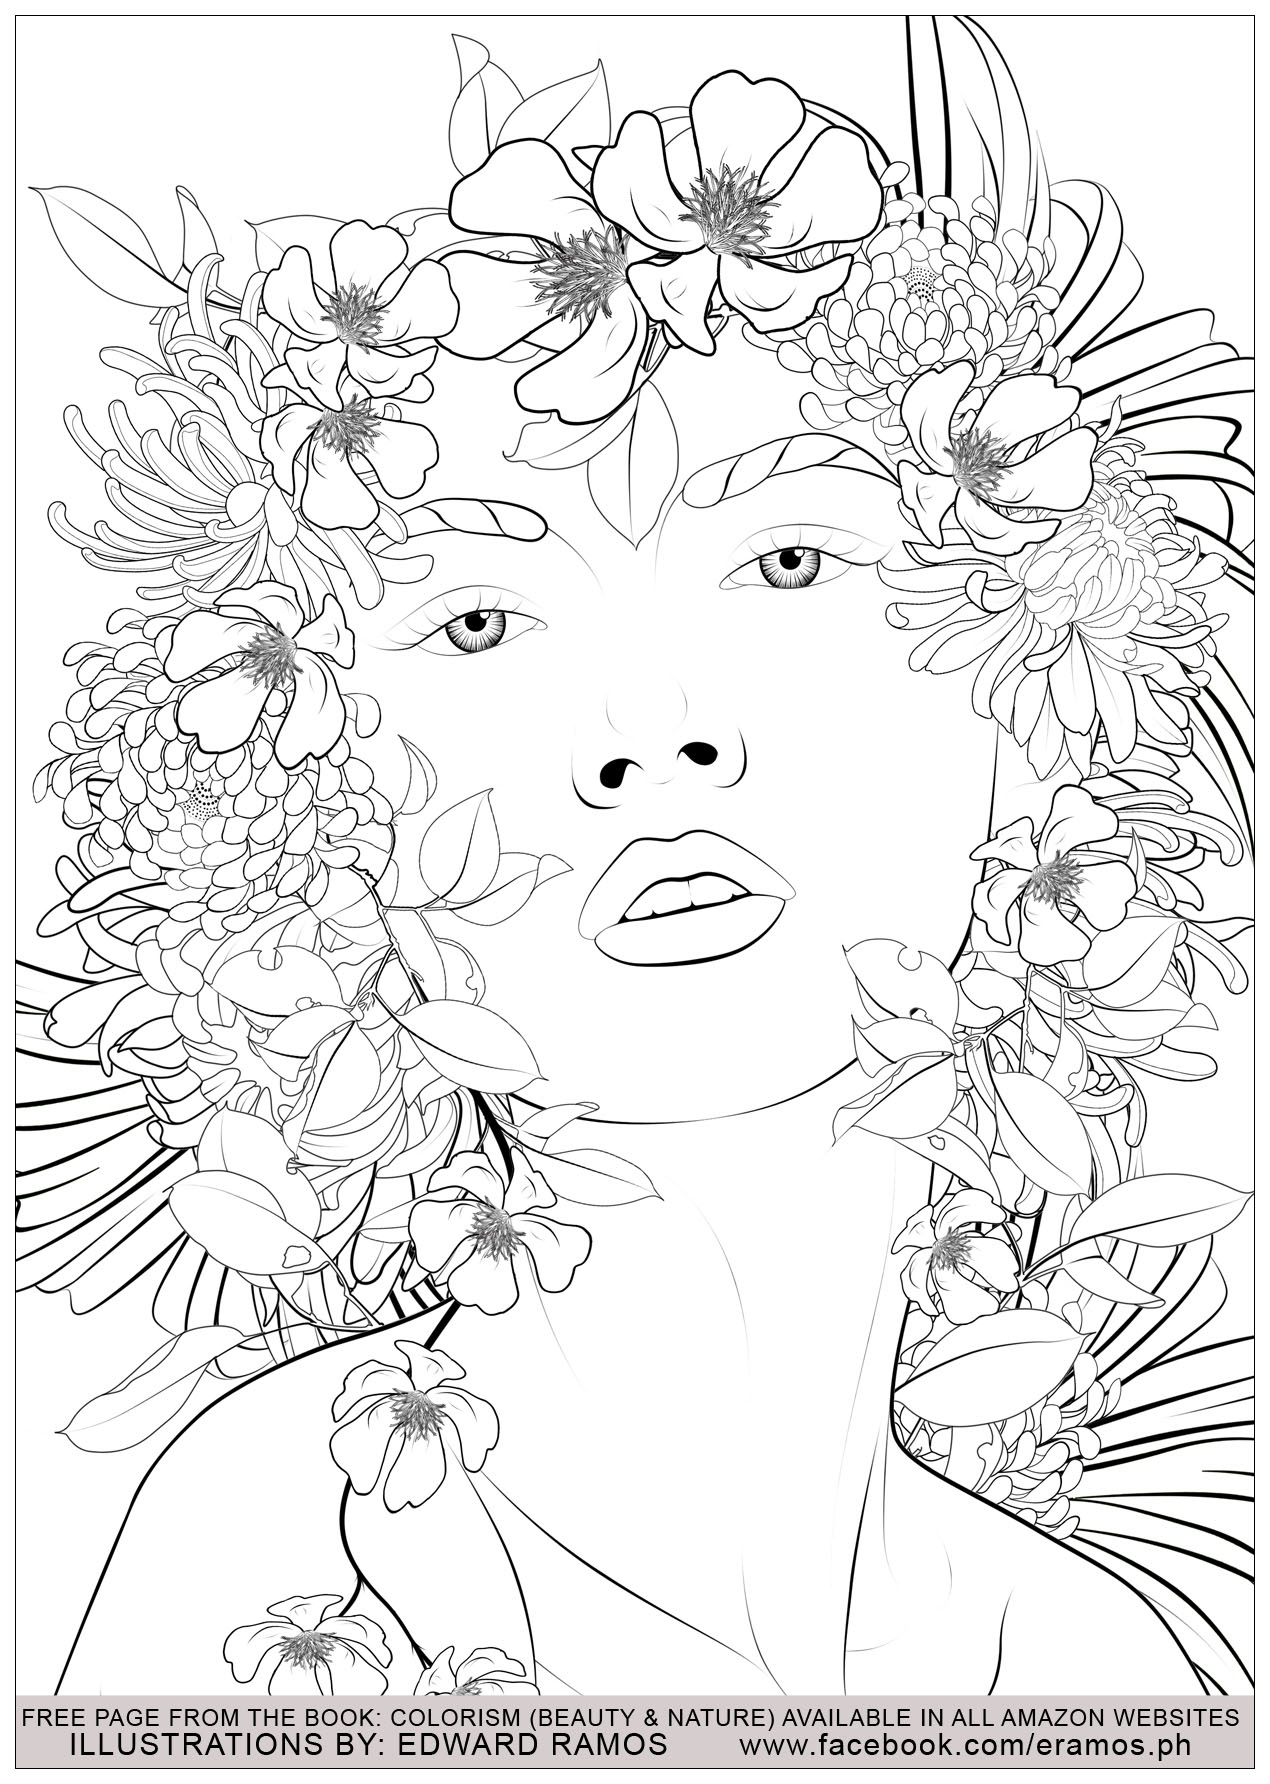 Illustration from the book Colorism - Beauty, Artist : Edward Ramos